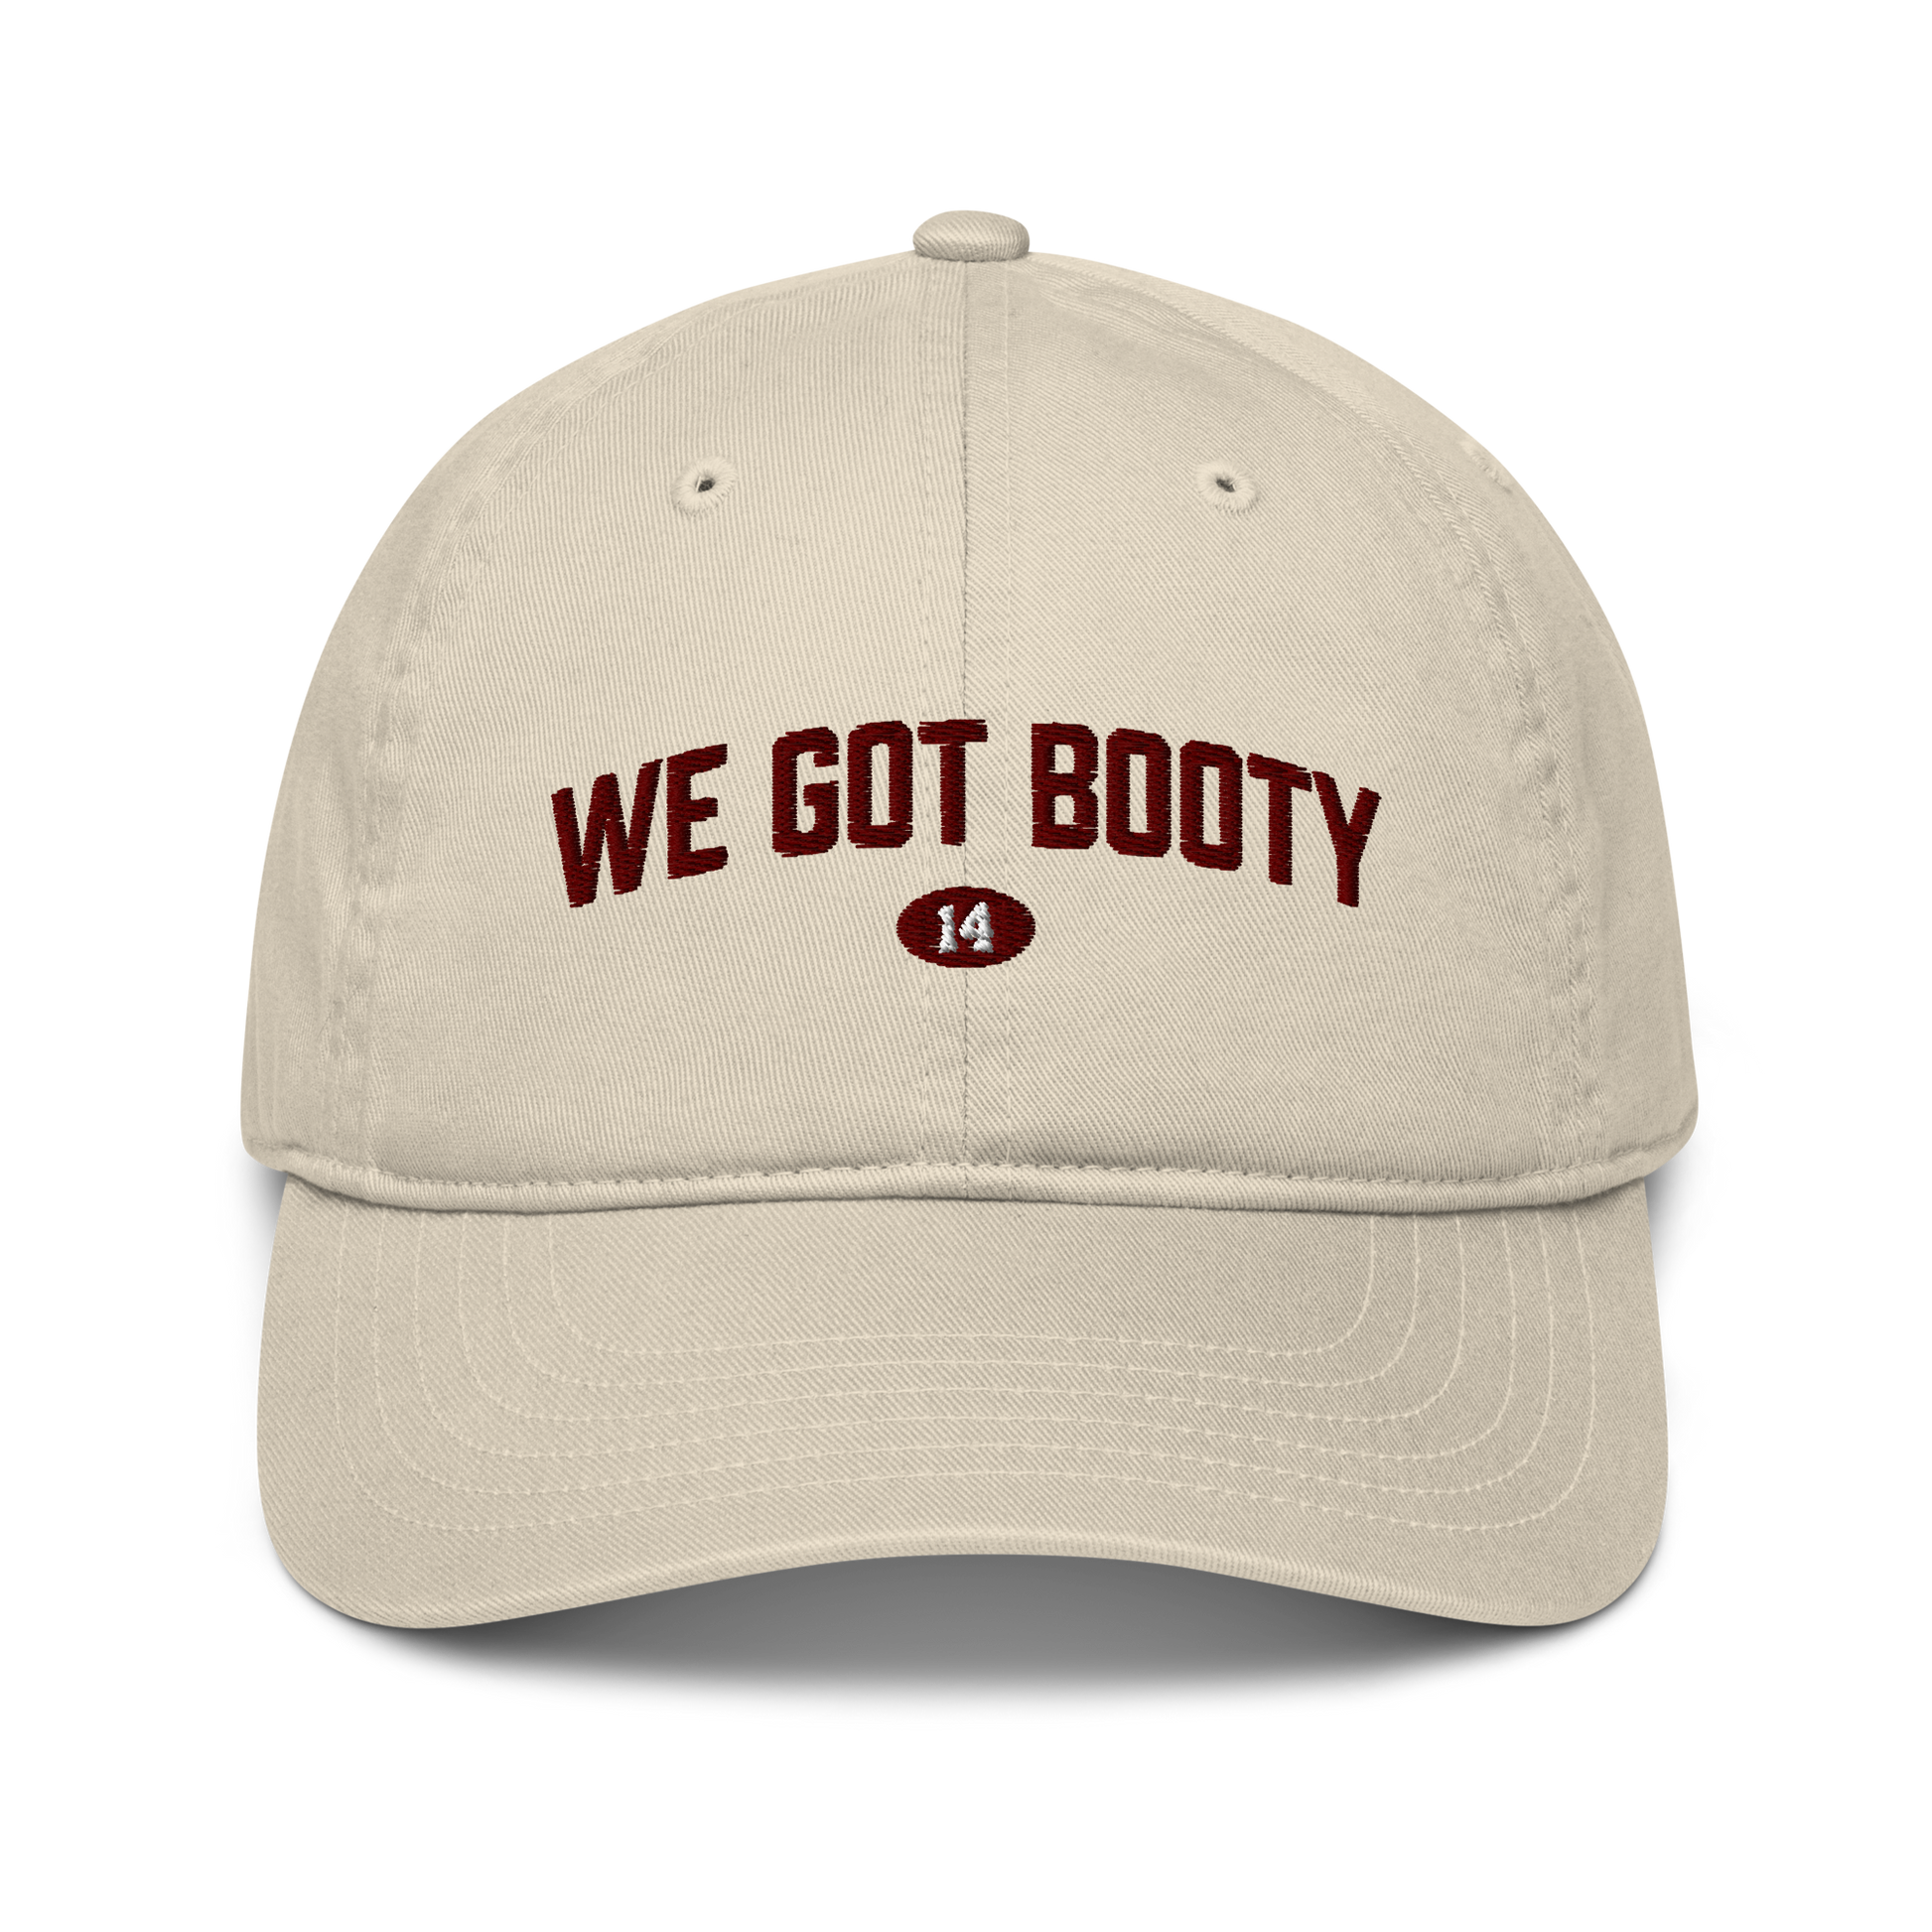 WE GOT BOOTY DAD HAT - The General Booty Official Shop by More Than Just A Name | MTJN